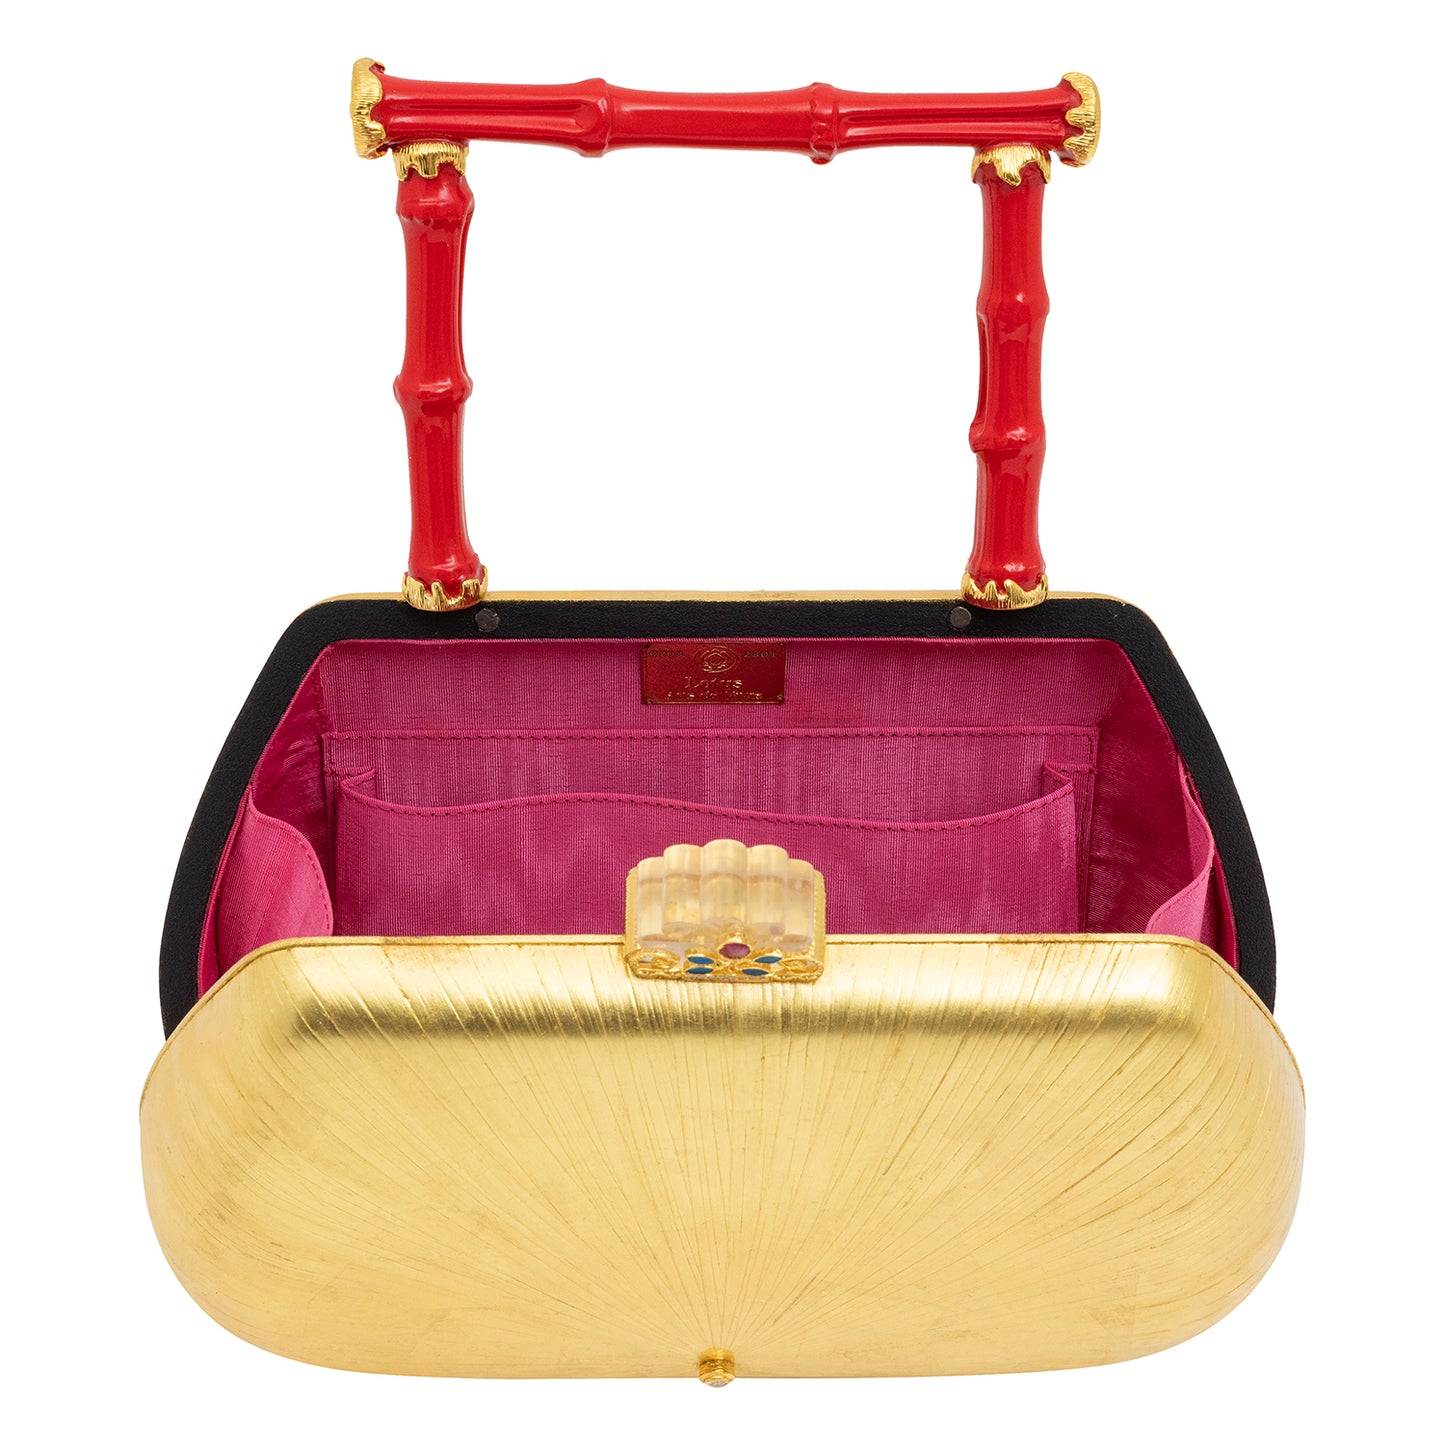 Golden Rice Marquetry Handbag with Red Lacquered Bamboo Handle